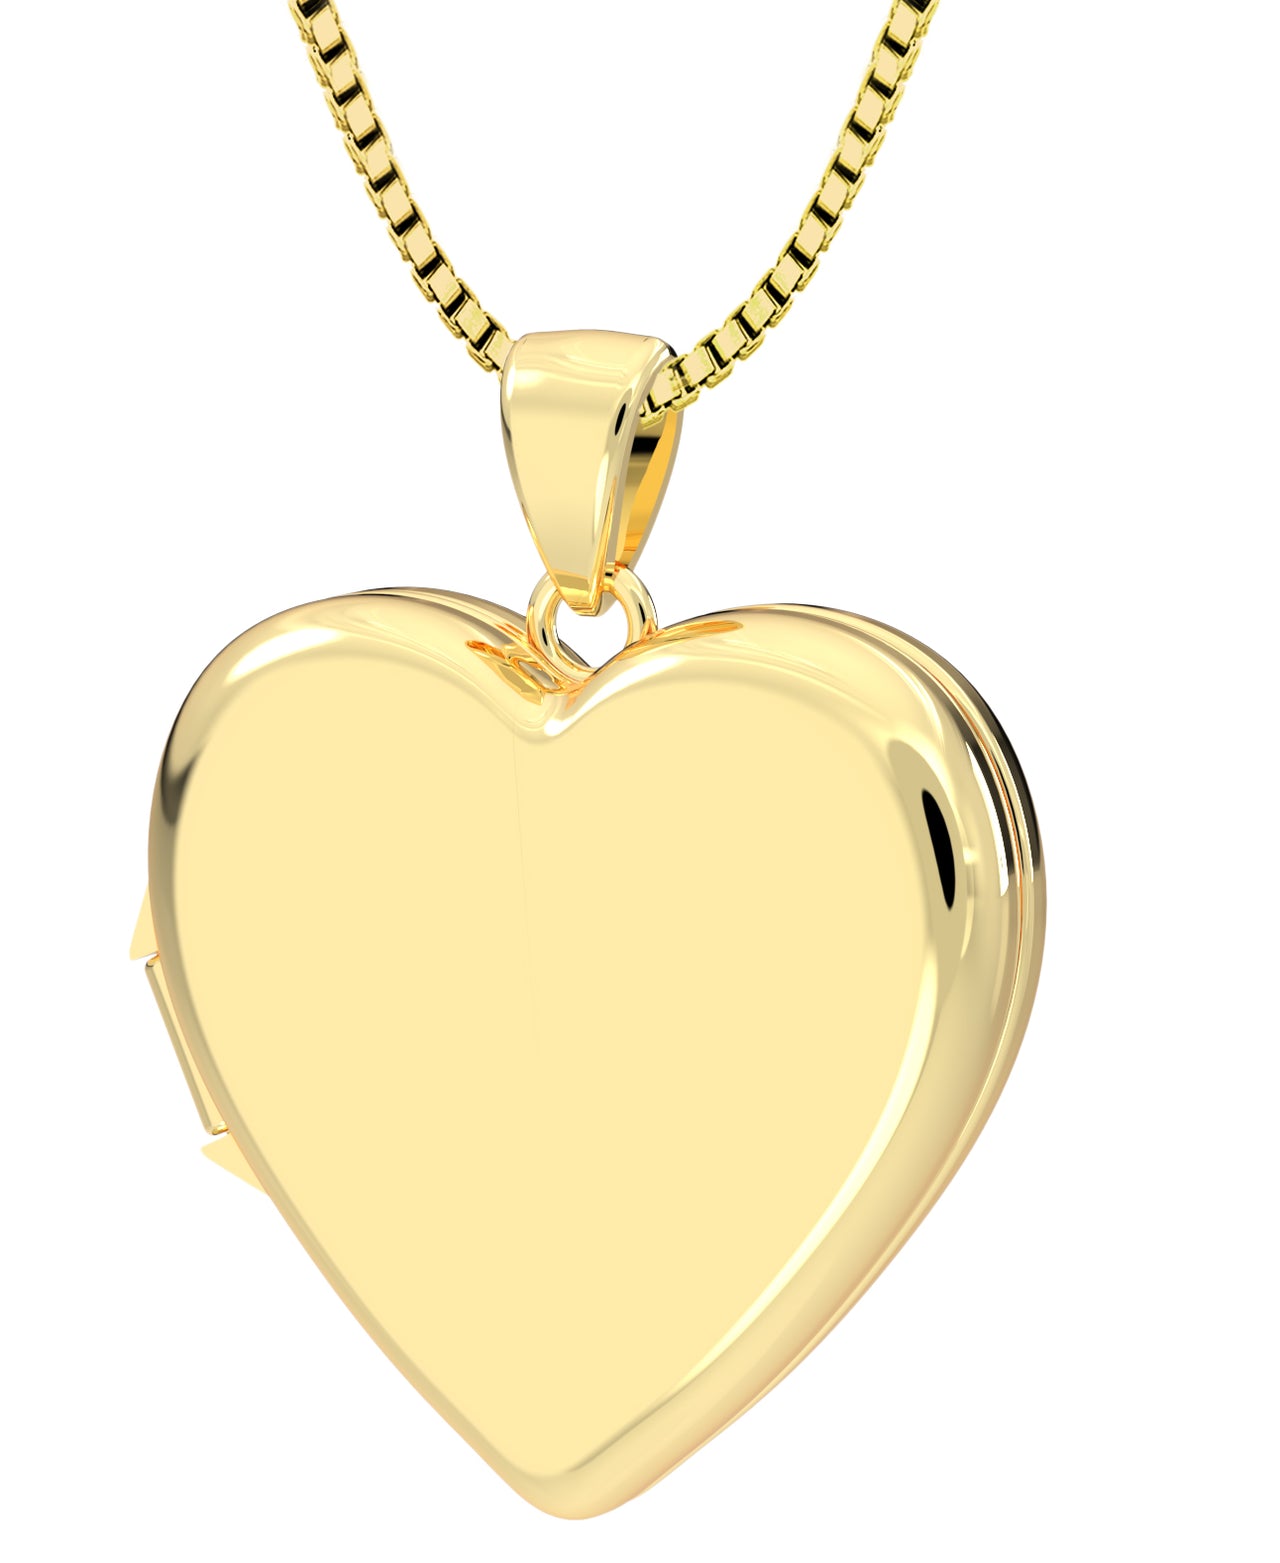 Engravable Personalized Ladies 14k Yellow Gold Polished Heart 2 Photo Locket Pendant Necklace, 24mm